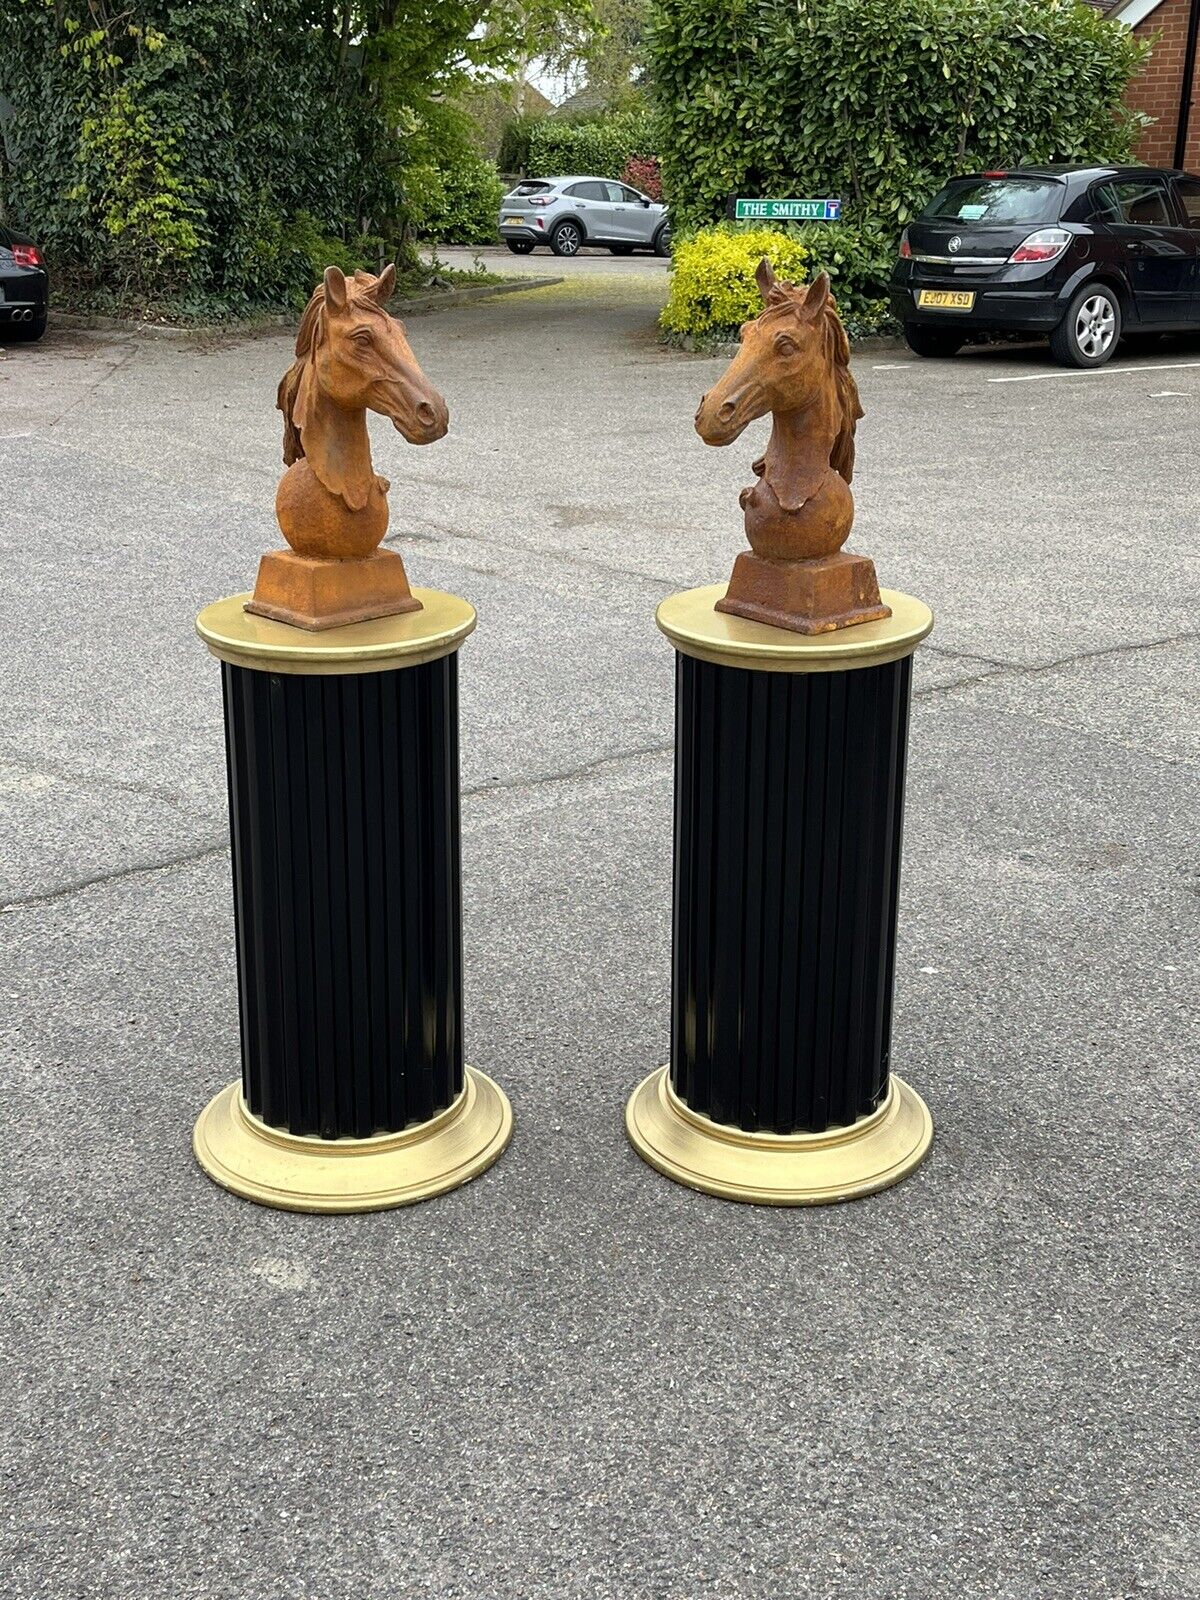 Pair Of Horse Head Statues, Cast Iron, Large In Size. With Corinthian Columns.